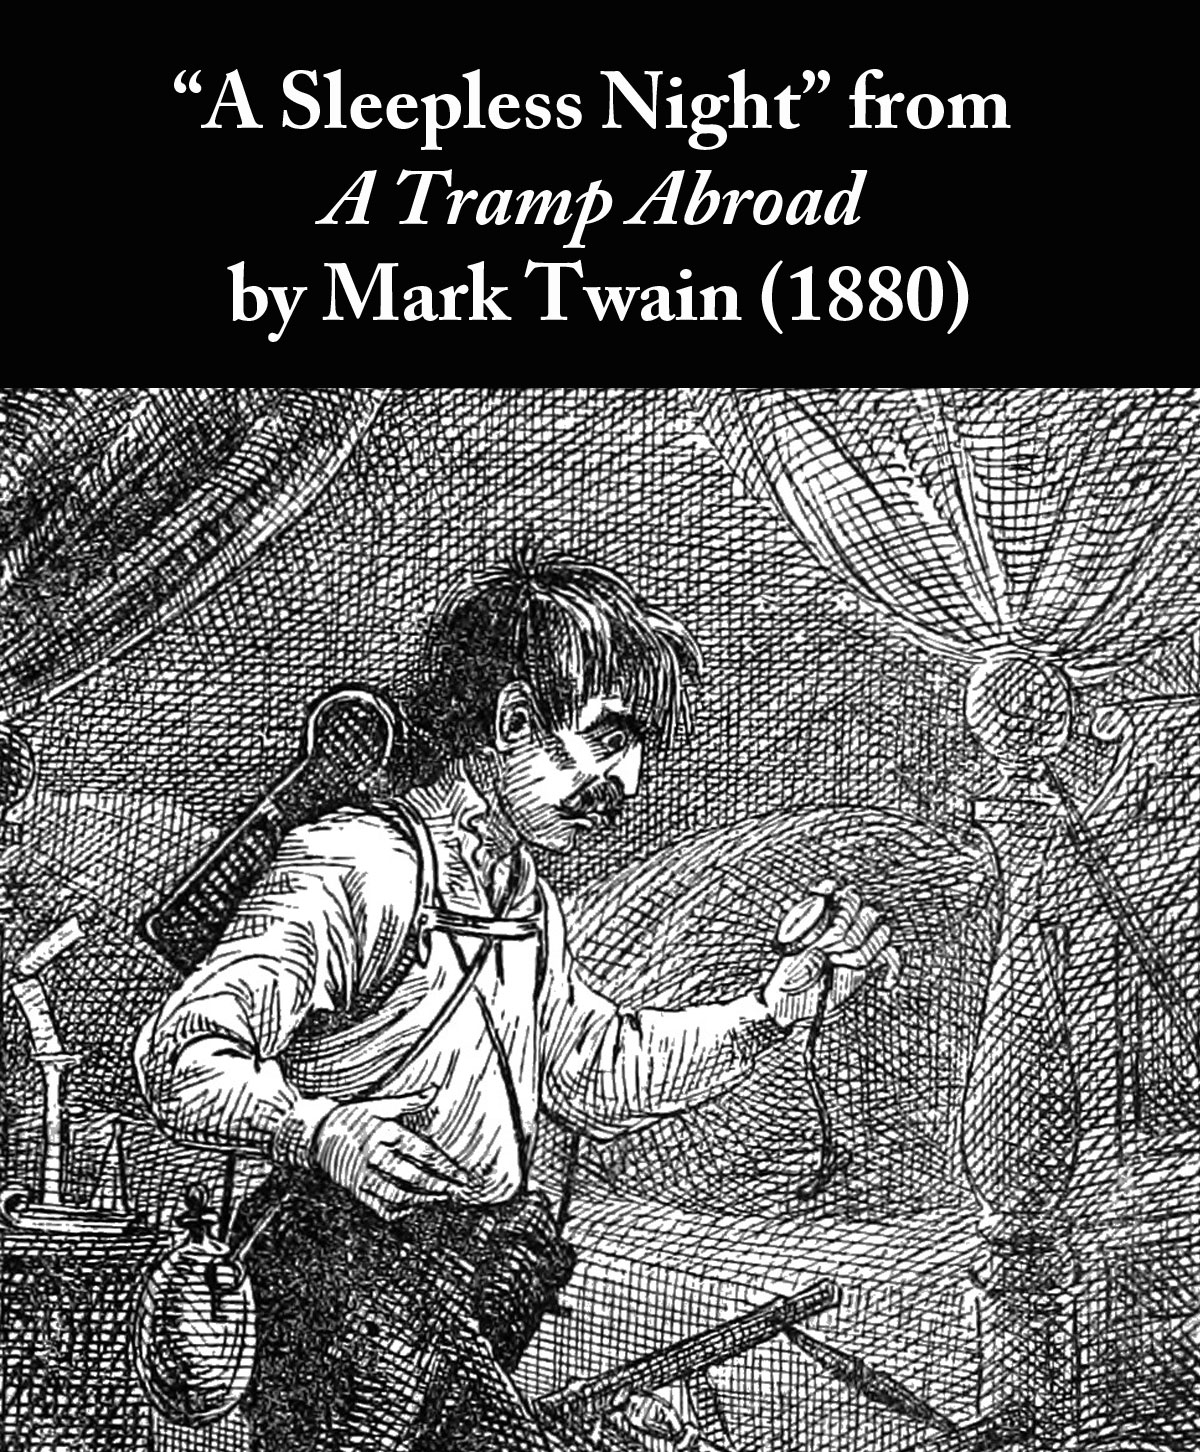 A Sleepless Night from A Tramp Abroad by Mark Twain (1880)